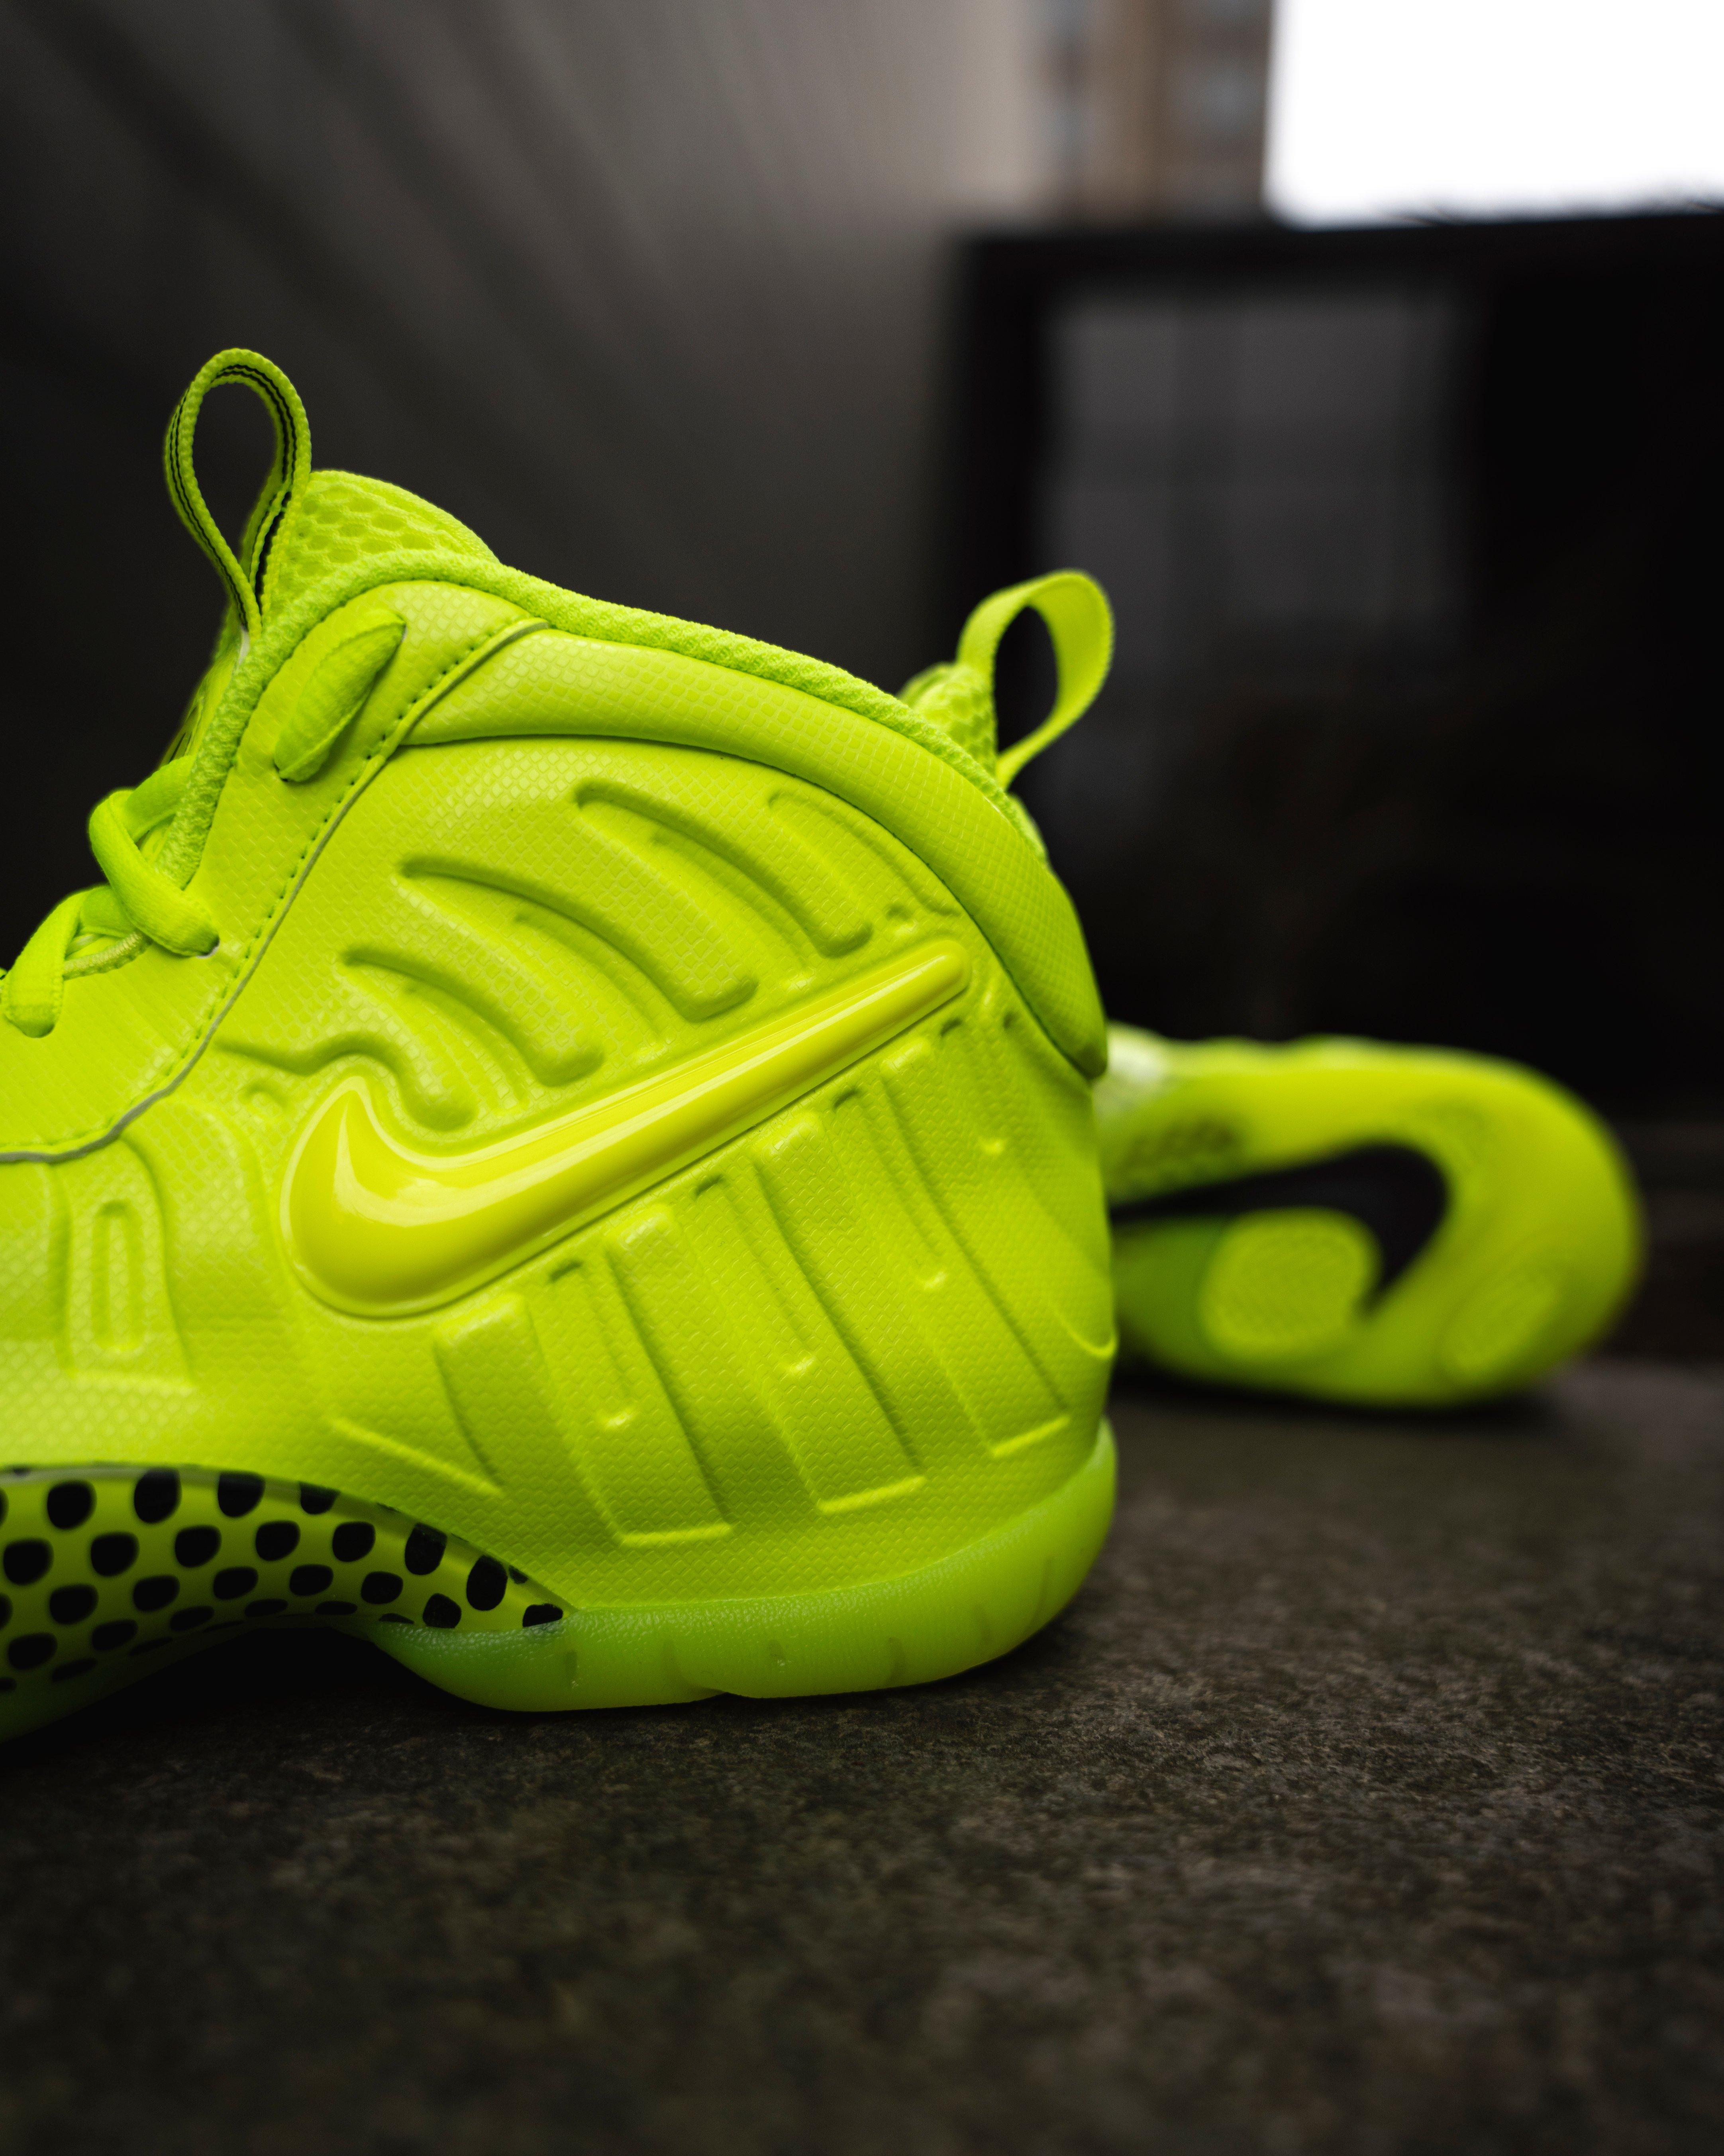 the shoe of the future inspired by what animal nike air foamposite